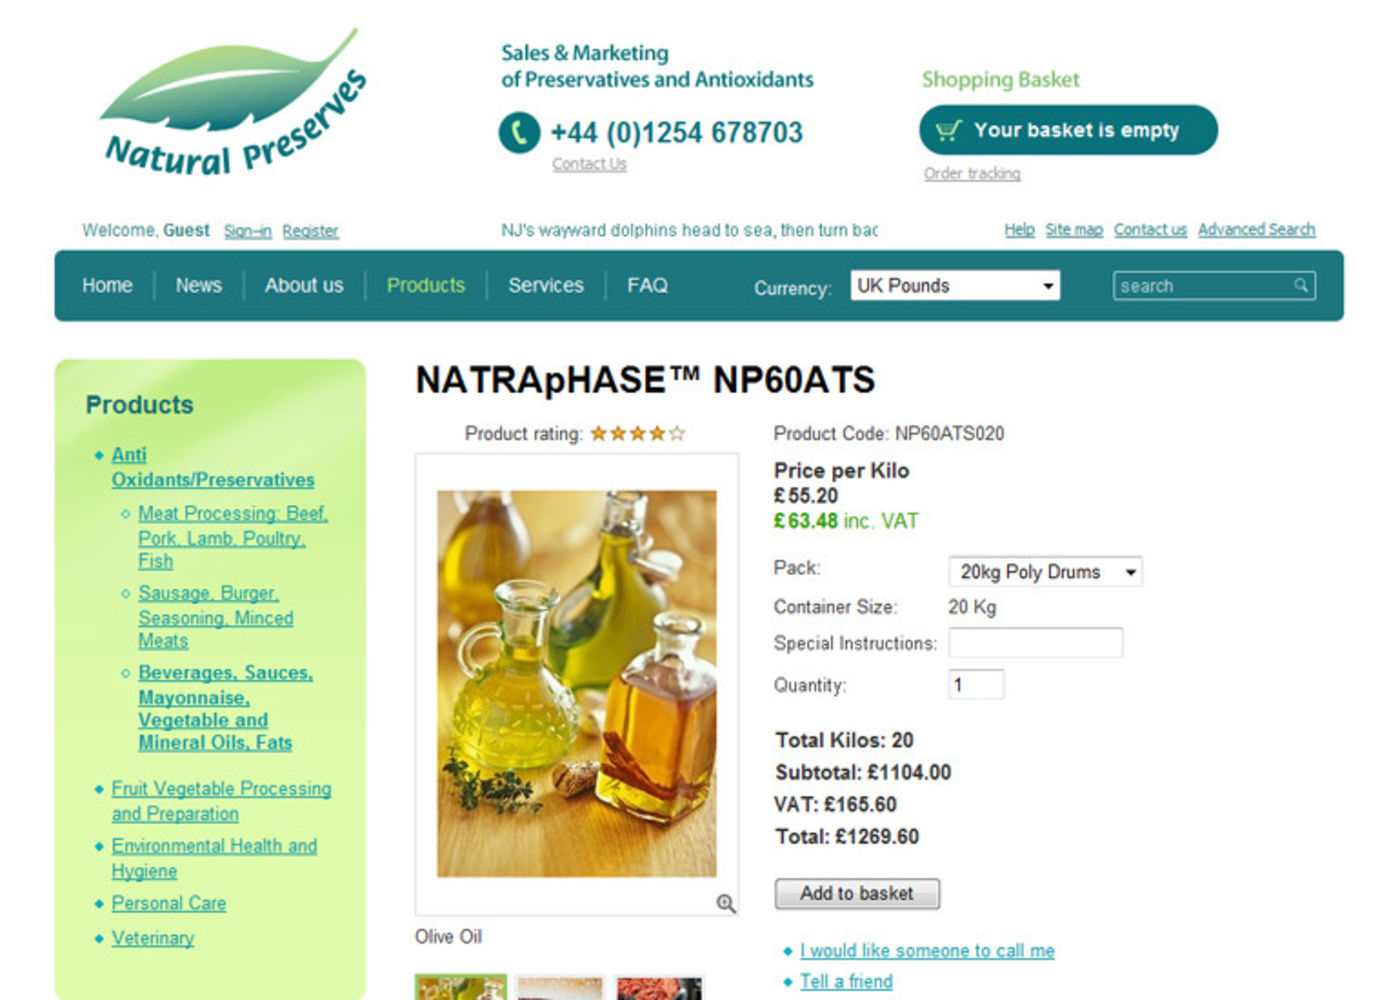 Natural Preserves Limited Product